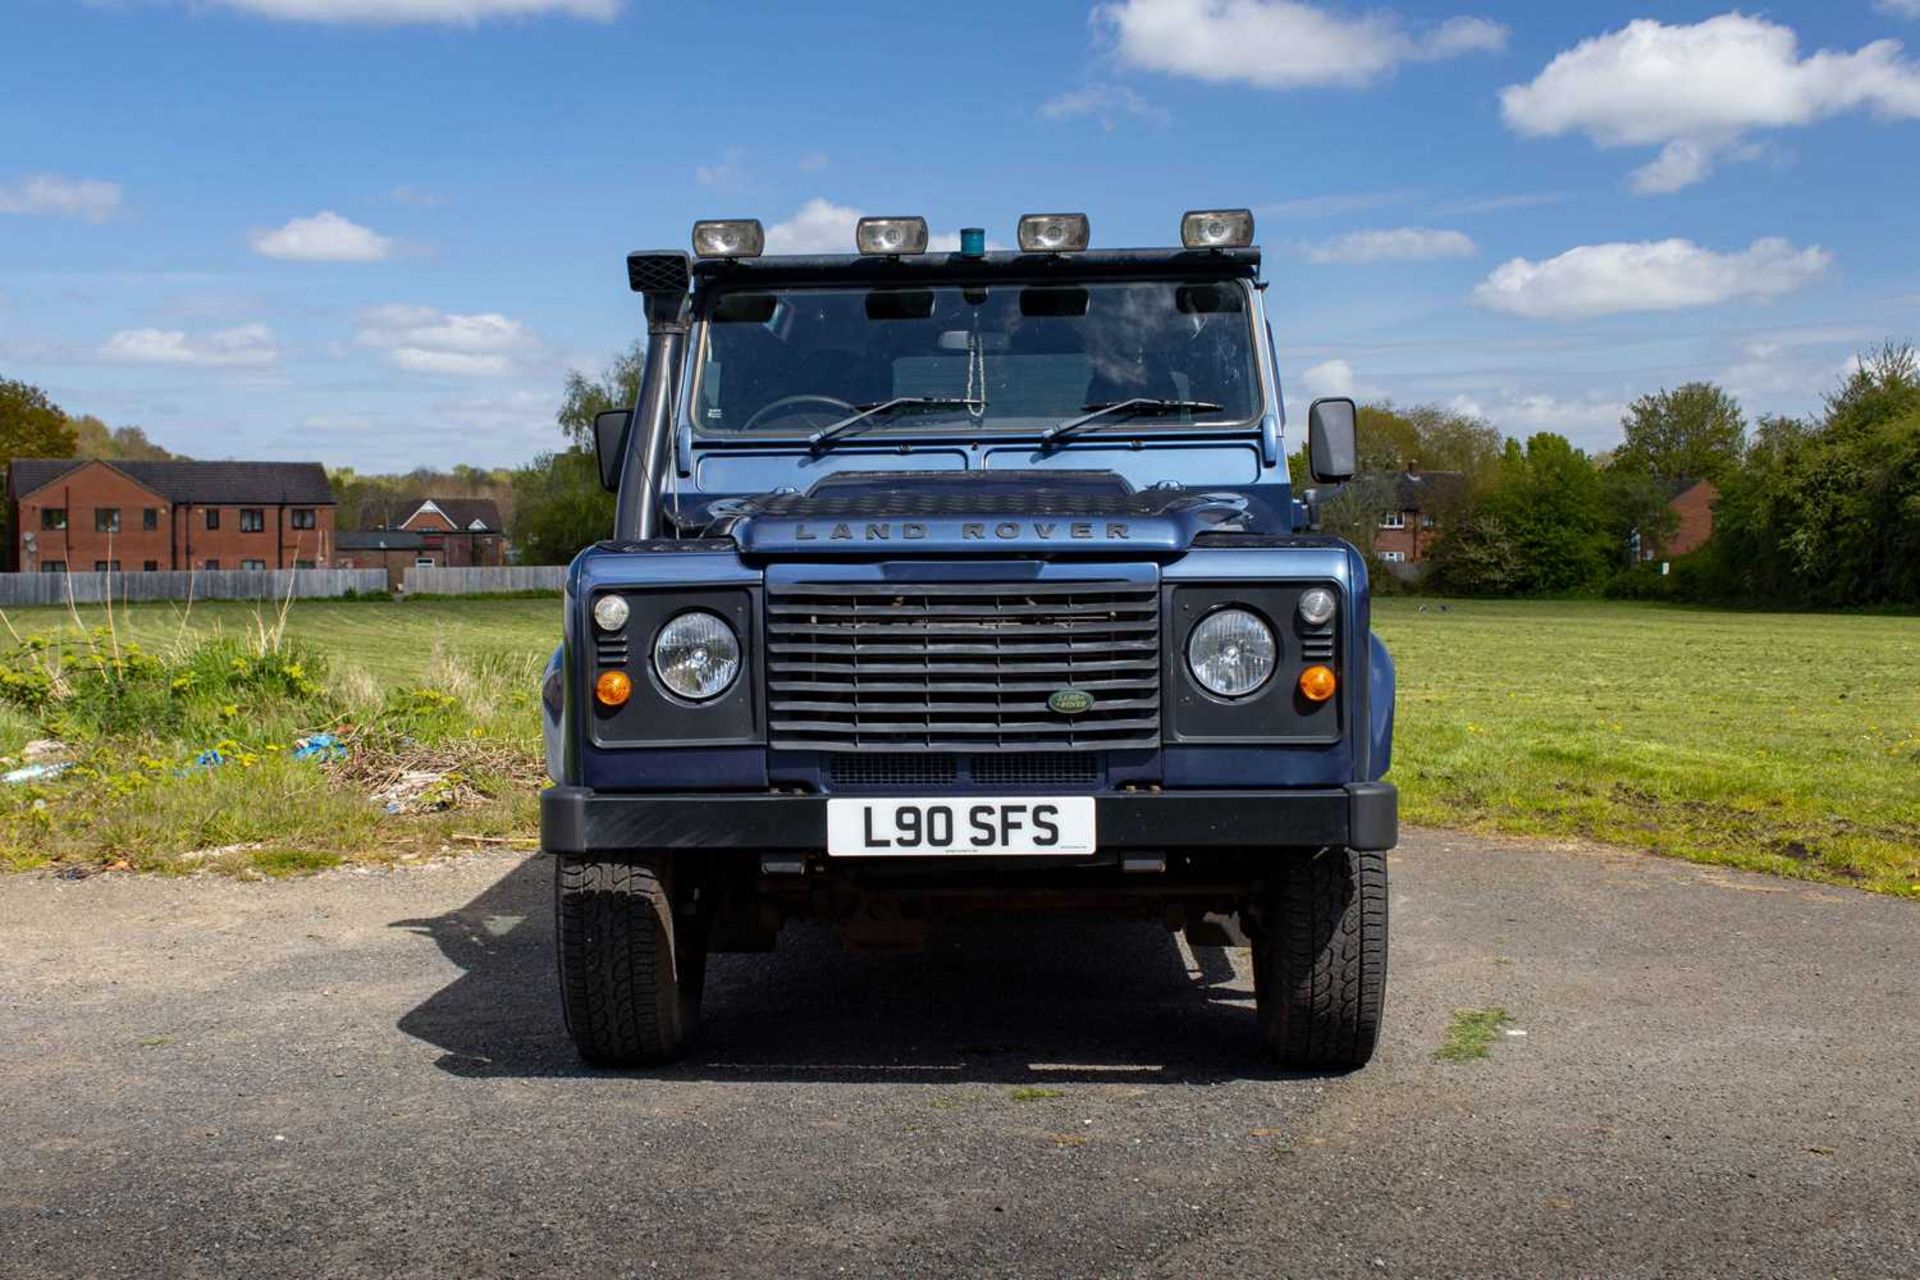 2007 Land Rover Defender 90 County  Powered by the 2.4-litre TDCi unit and features numerous tastefu - Image 3 of 76